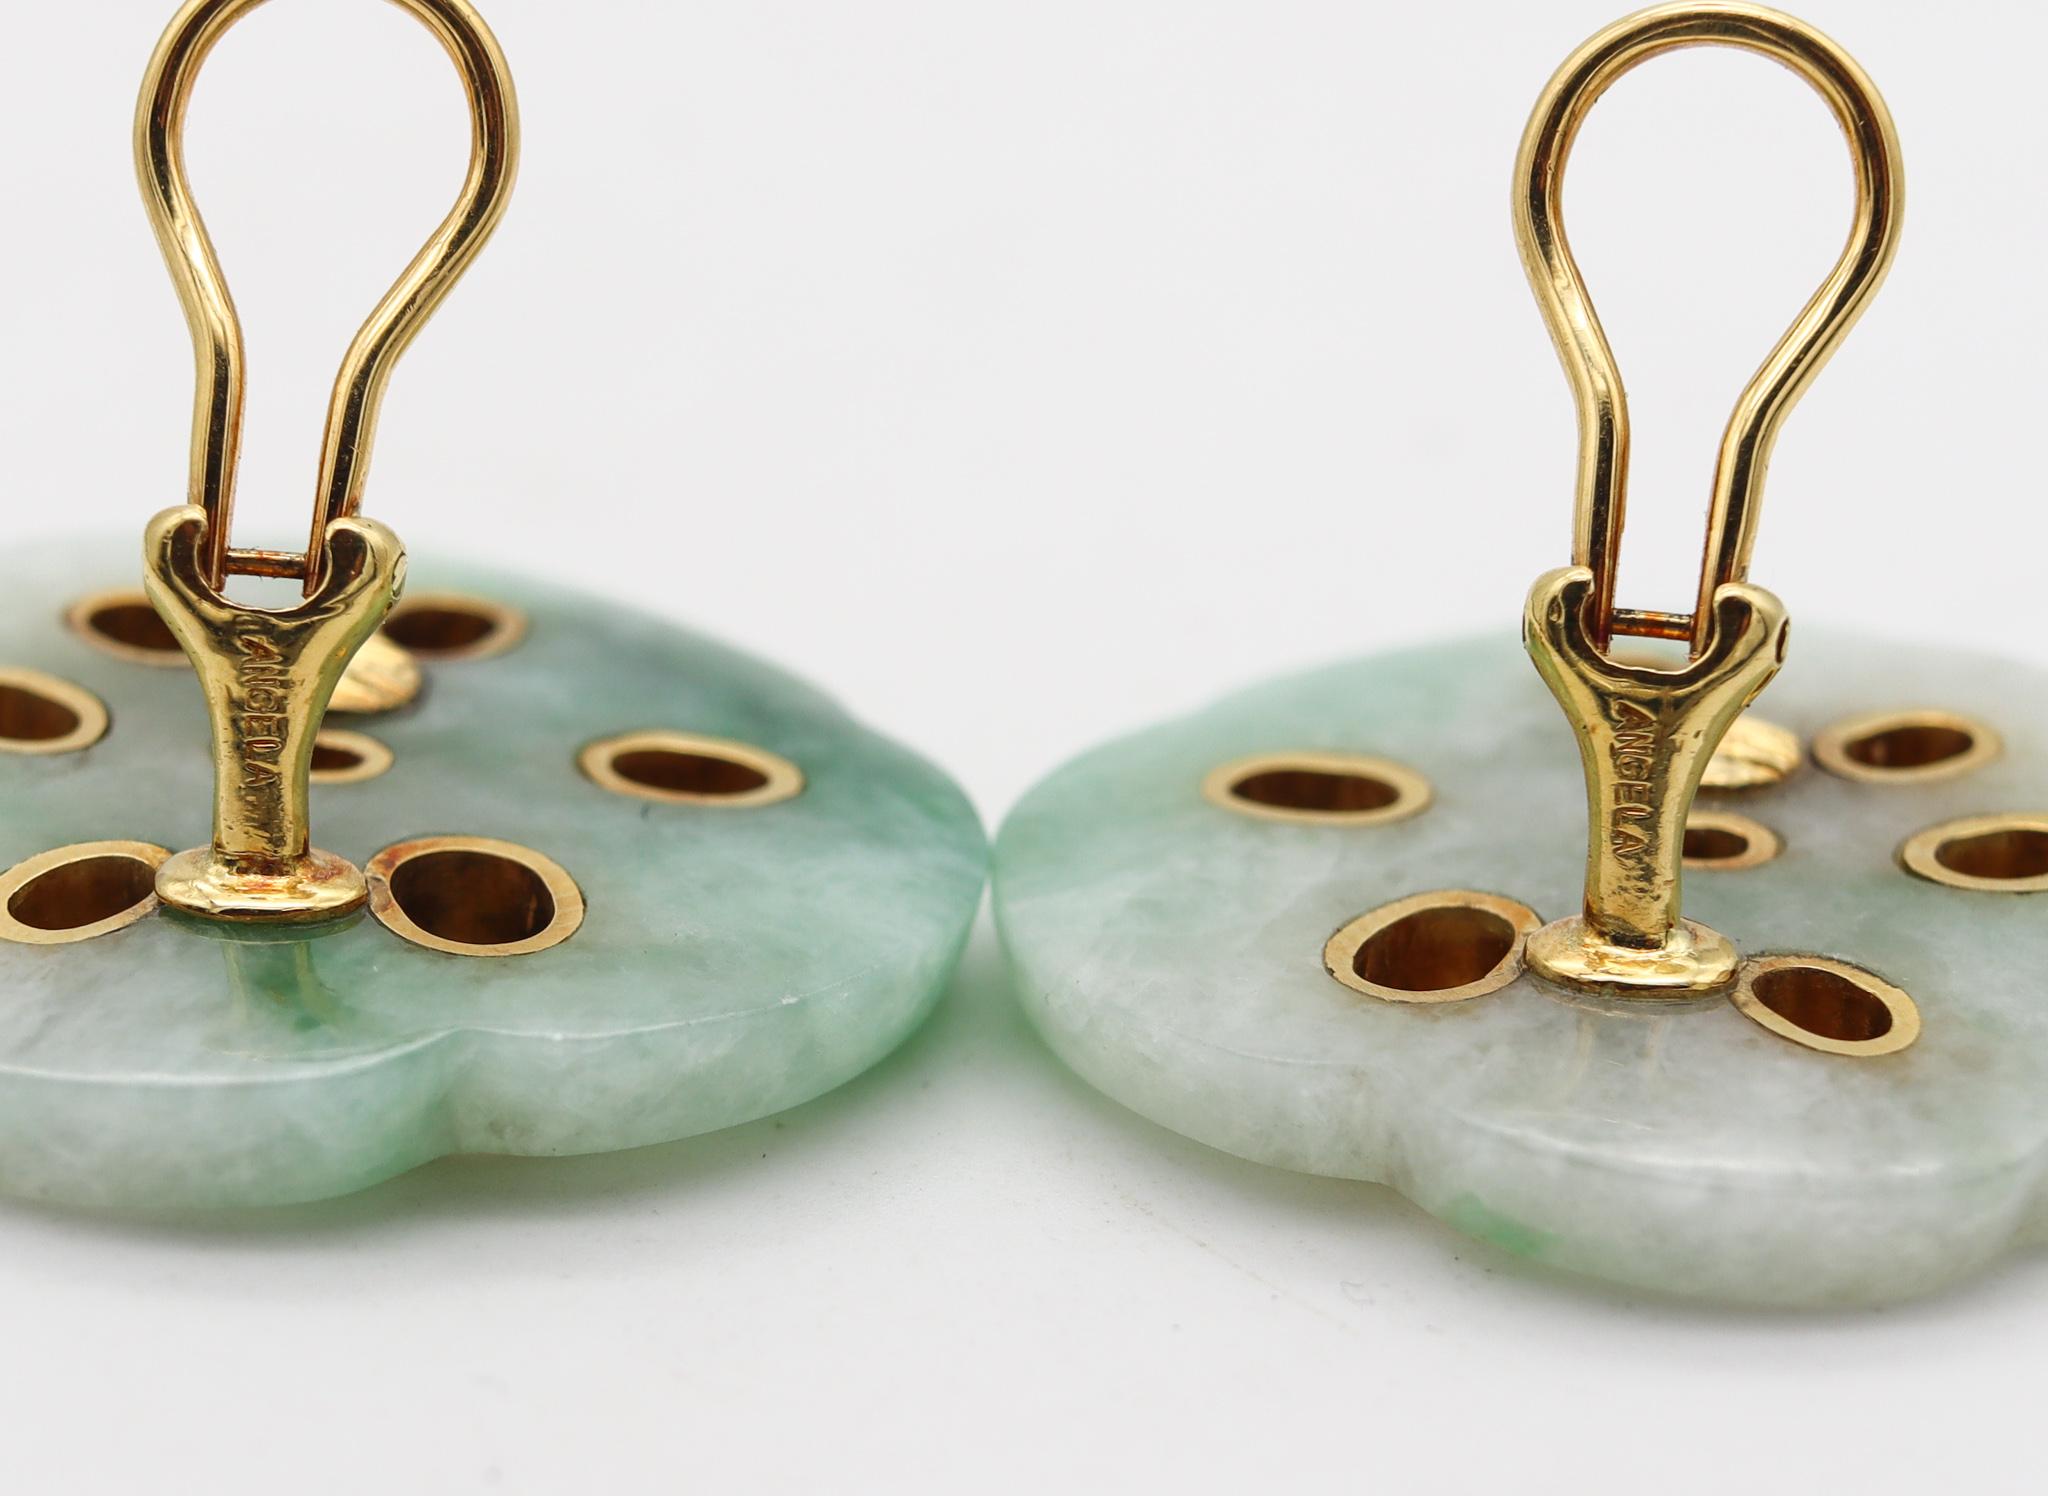 Mixed Cut Angela Cummings Studios 1983 Lotus Clip Earrings in 18Kt Gold with Nephrite Jade For Sale